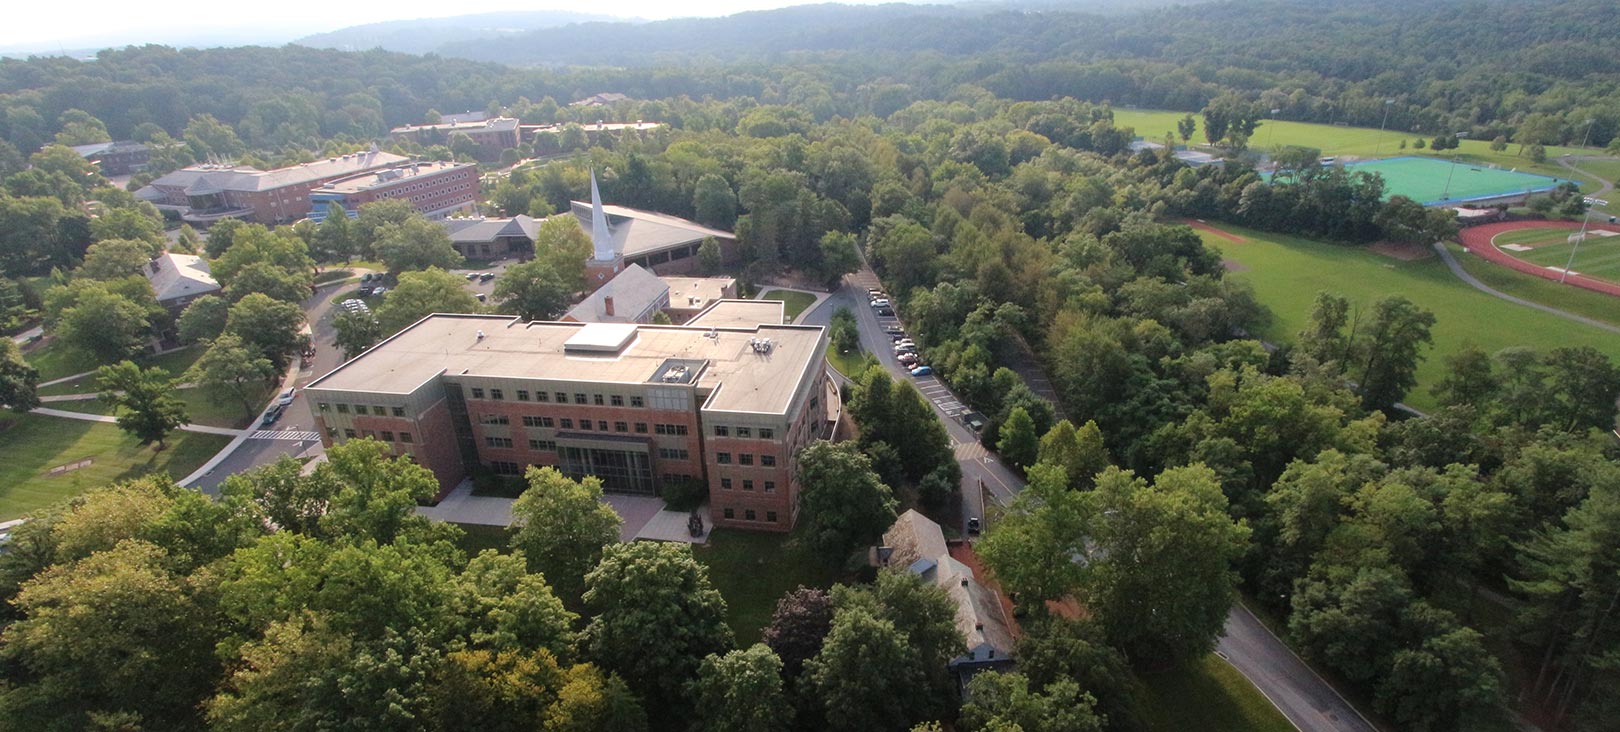 Facility Services facility services aerial view of campus.jpg